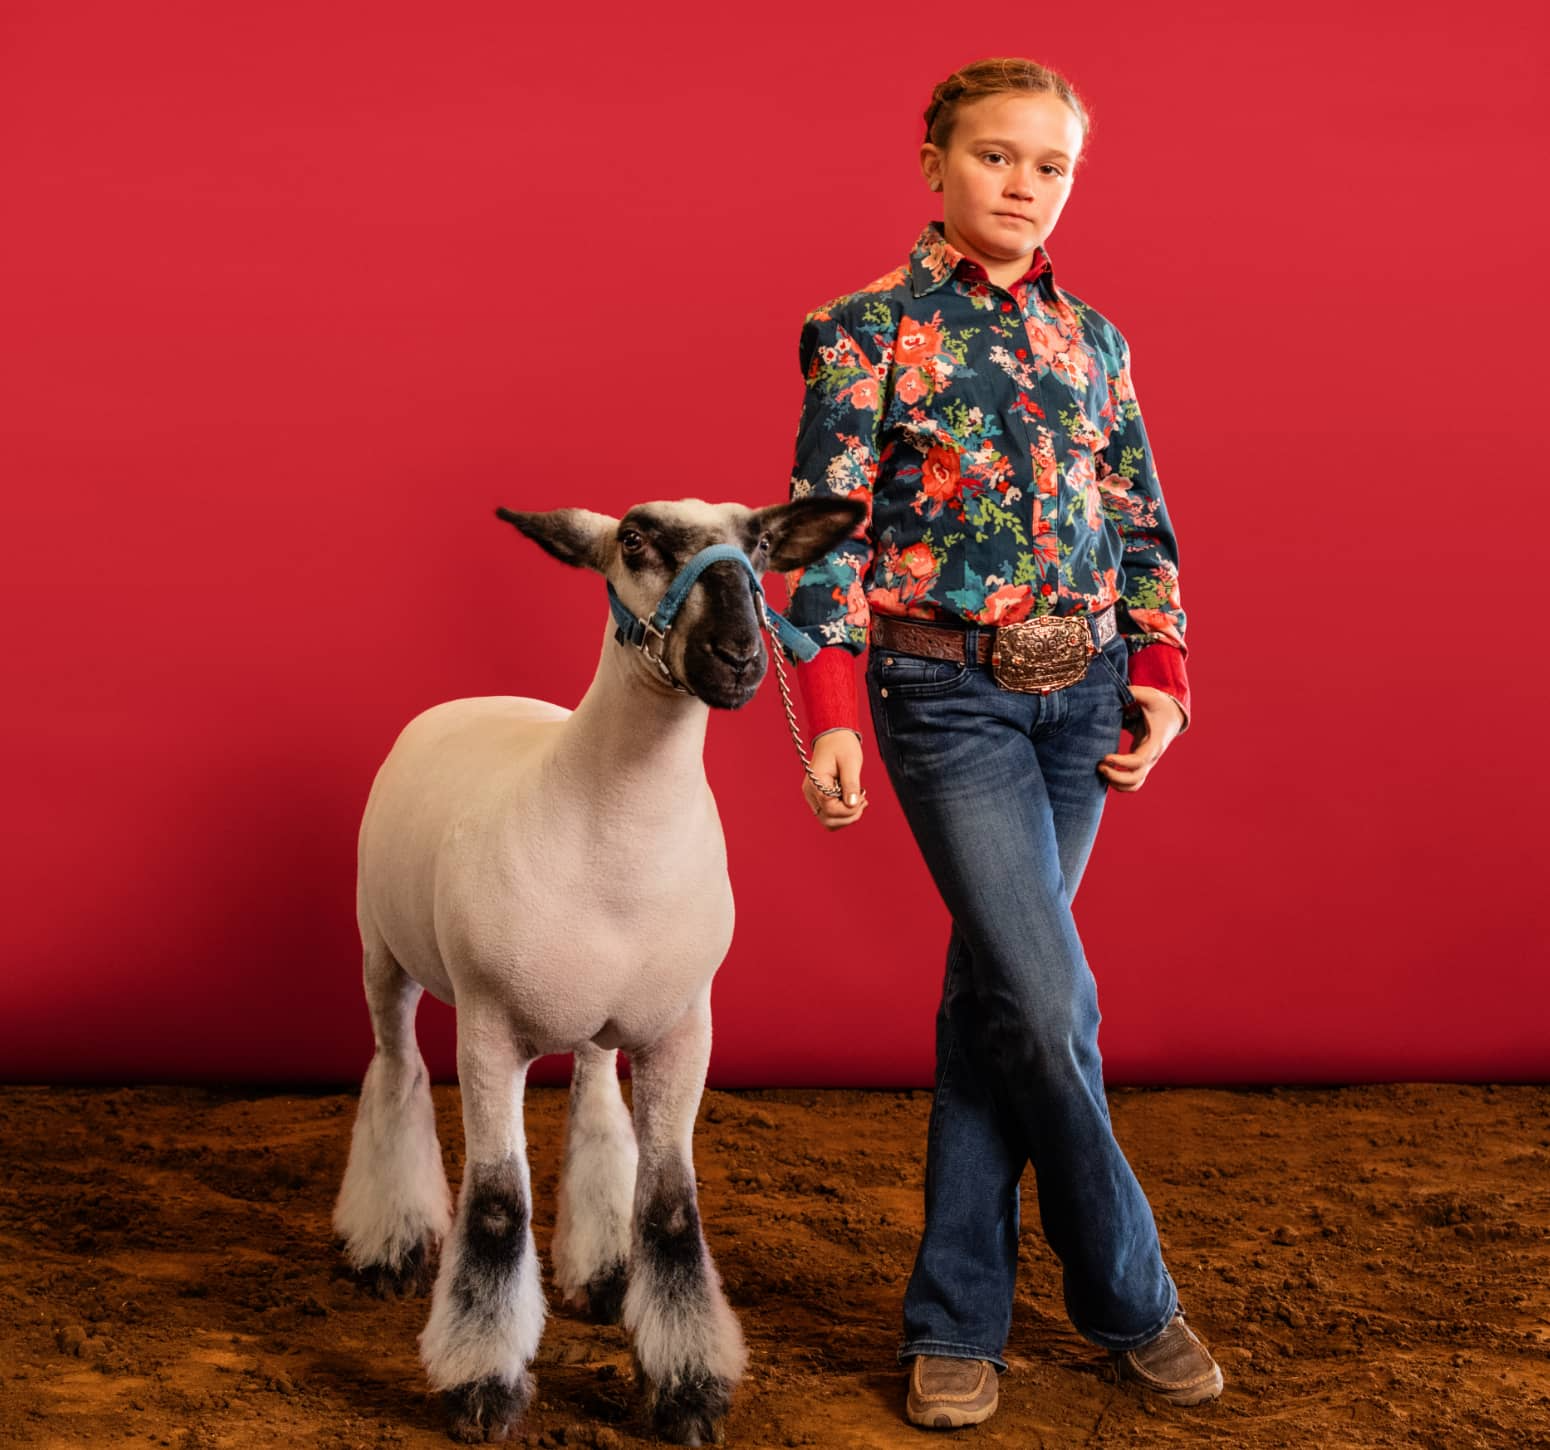 Girl standing next to animal with red background